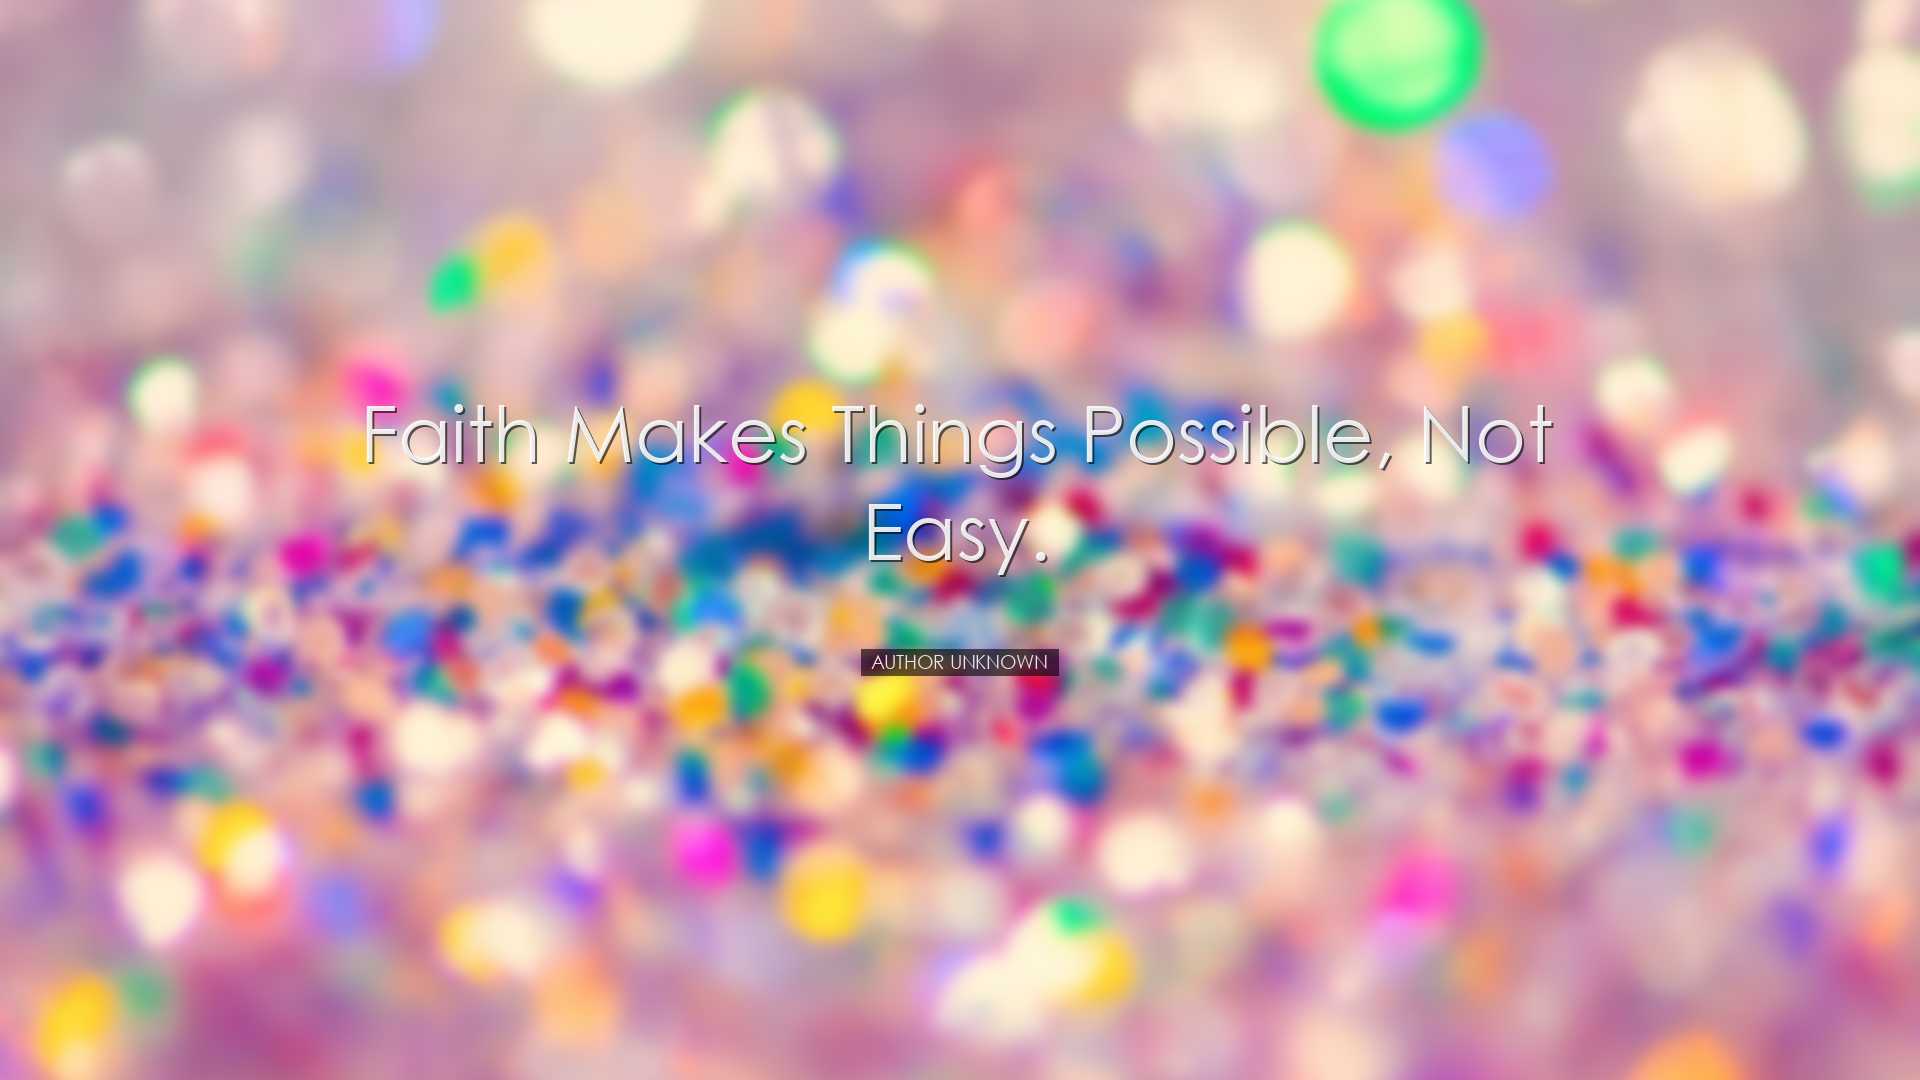 Faith makes things possible, not easy. - Author Unknown